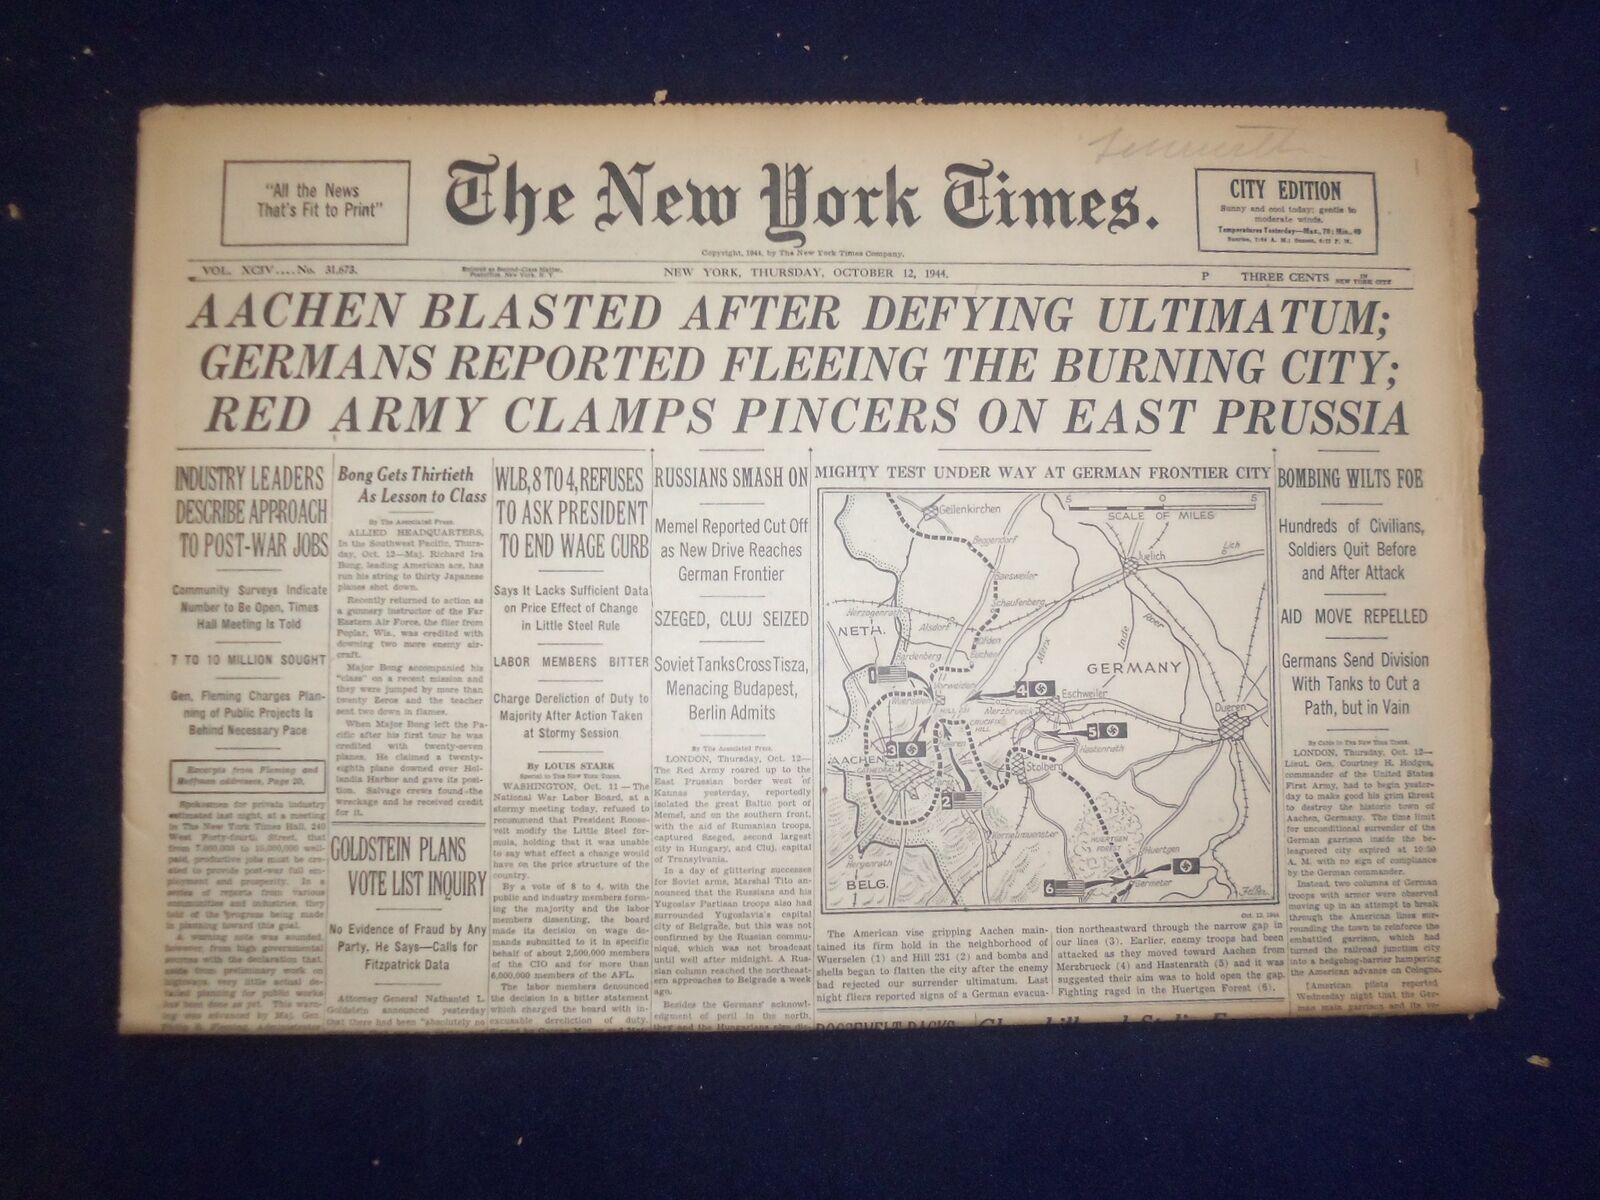 1944 OCT 12 NEW YORK TIMES - AACHEN BLASTED AFTER DEFYING ULTIMATUM - NP 6637